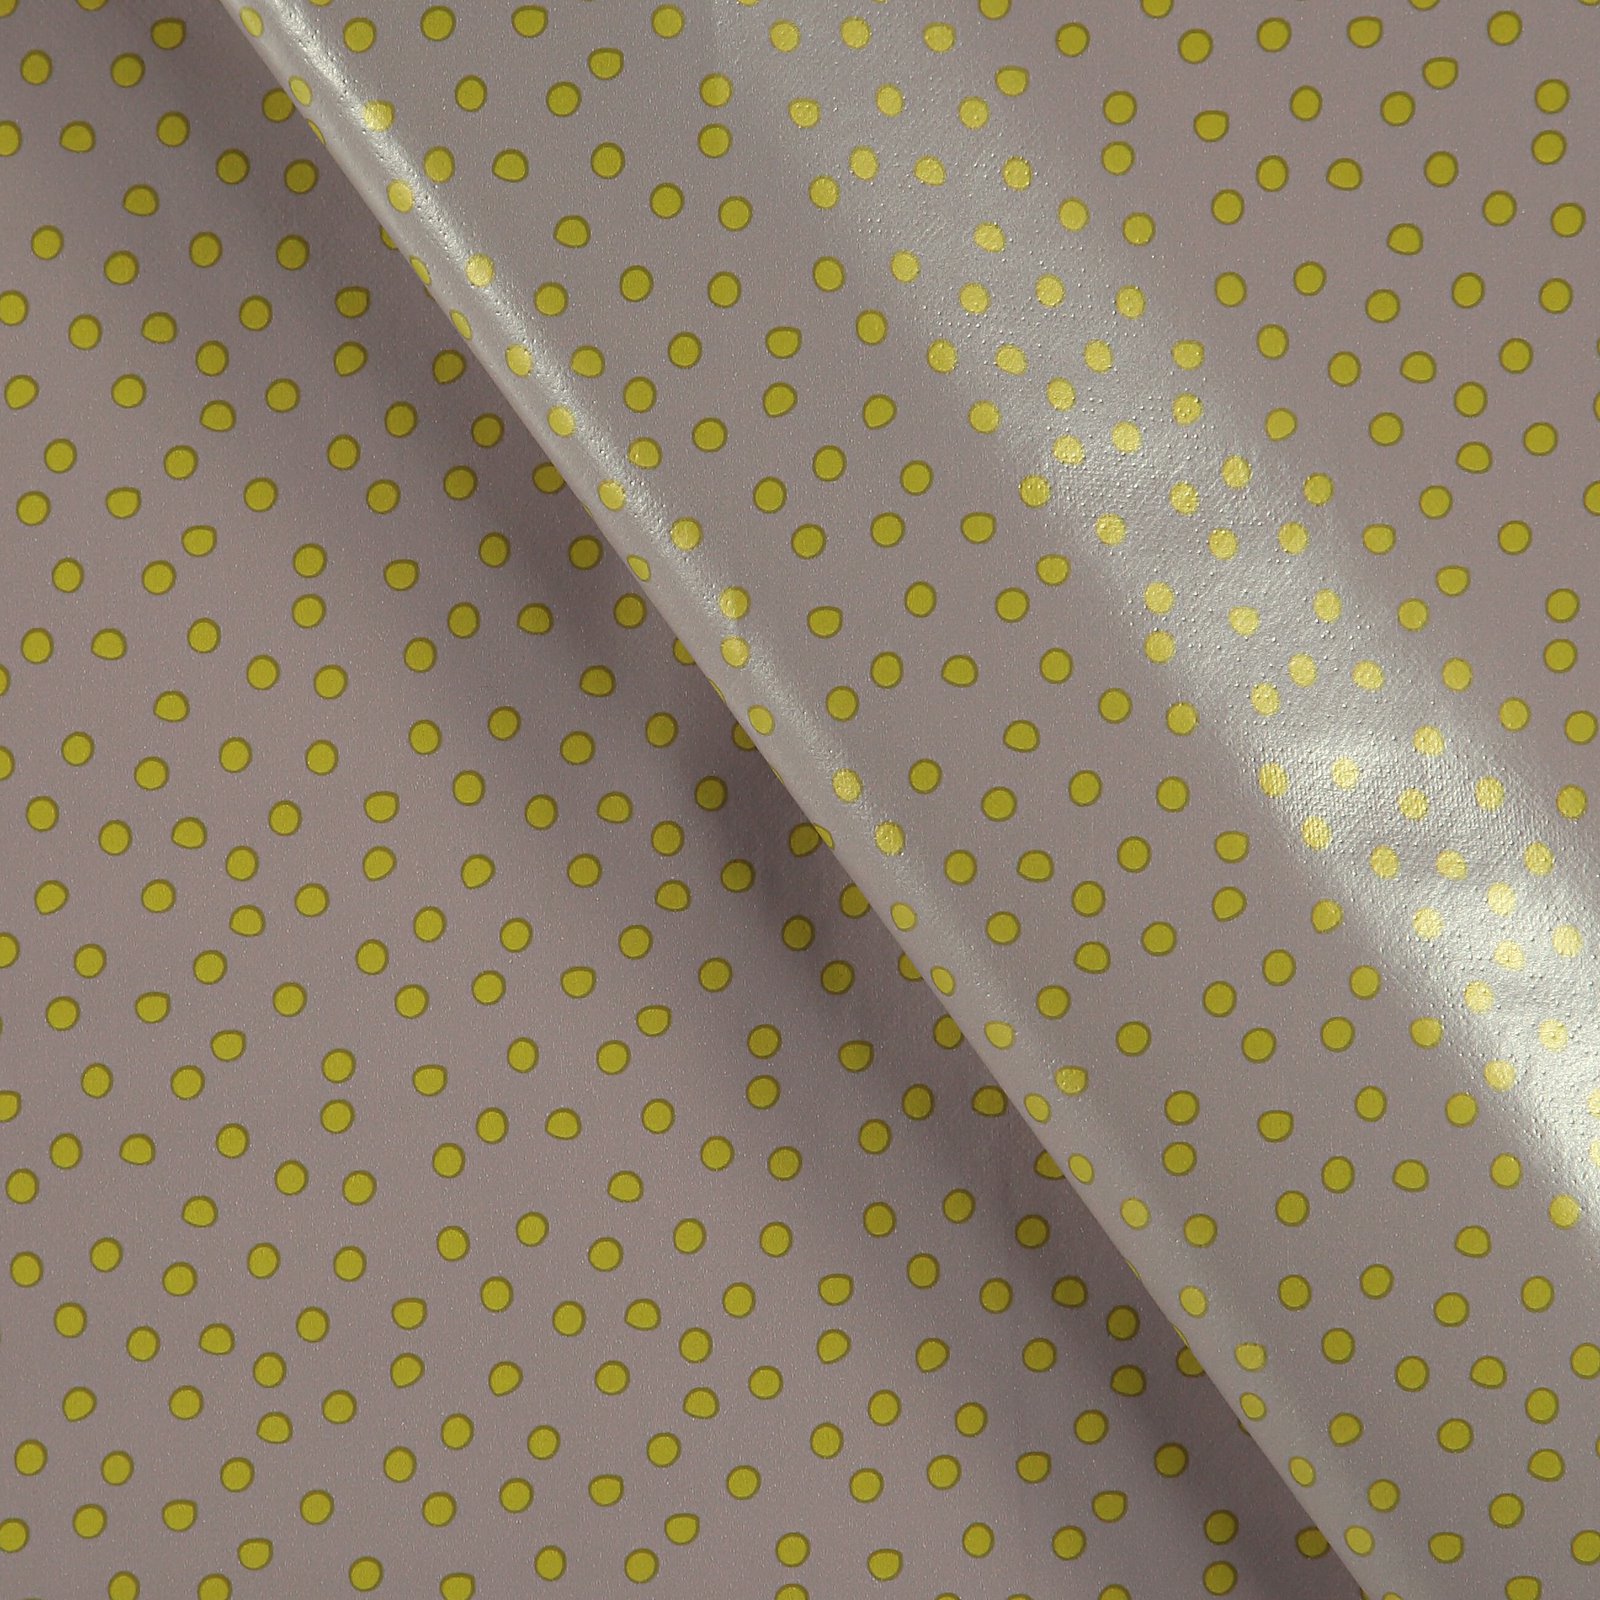 Non-woven oilcloth purple w gold dots 866127_pack